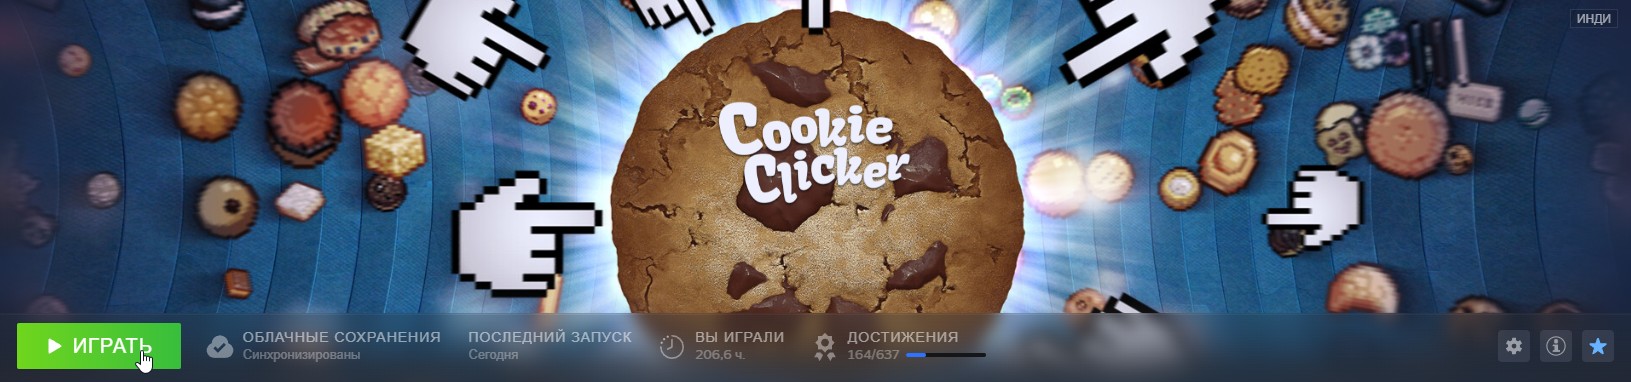 HOW TO CLICK COOKIE!?!?!??? image 1